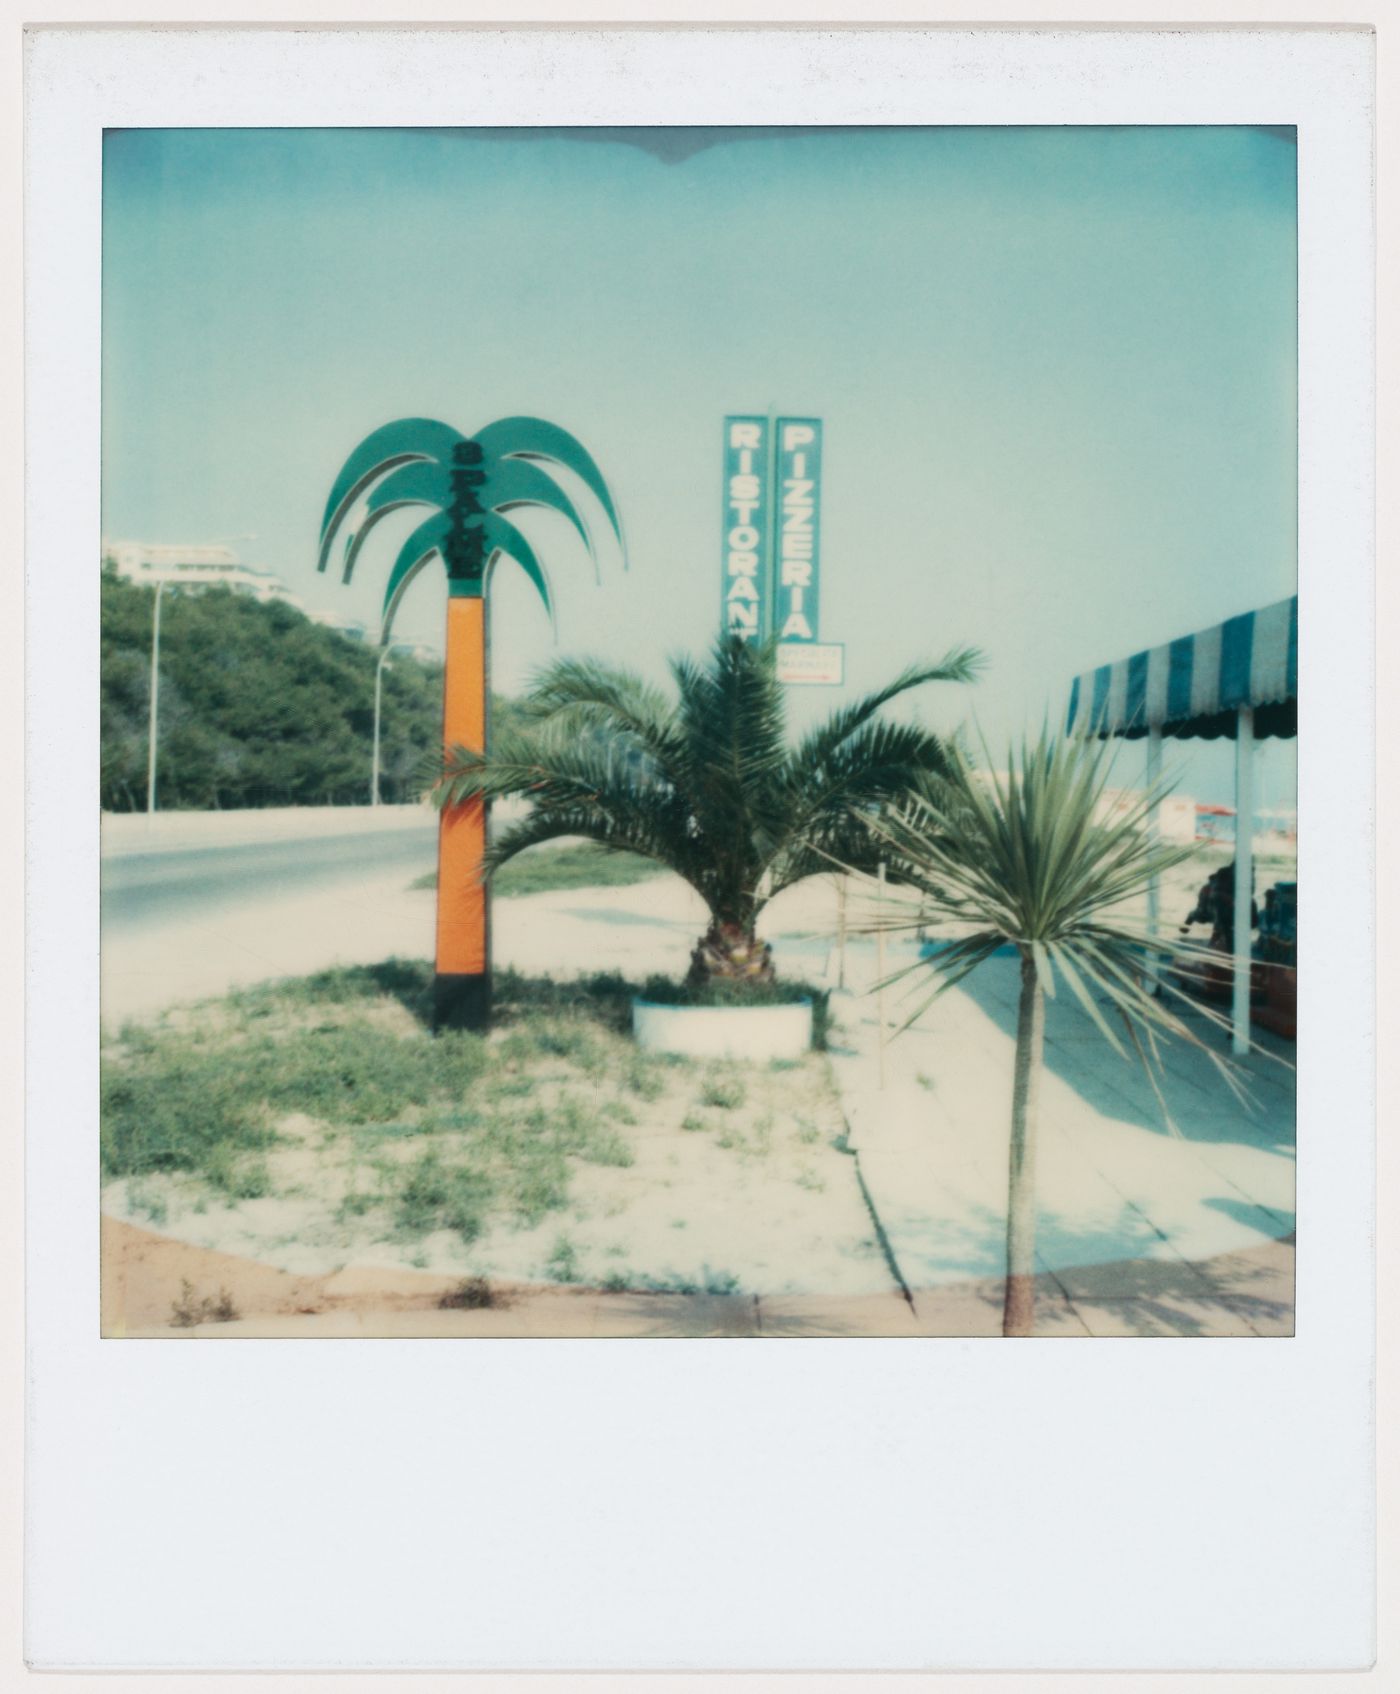 View of fake palm tree and the "Ristorante Pizzeria" sign along the road, Italy